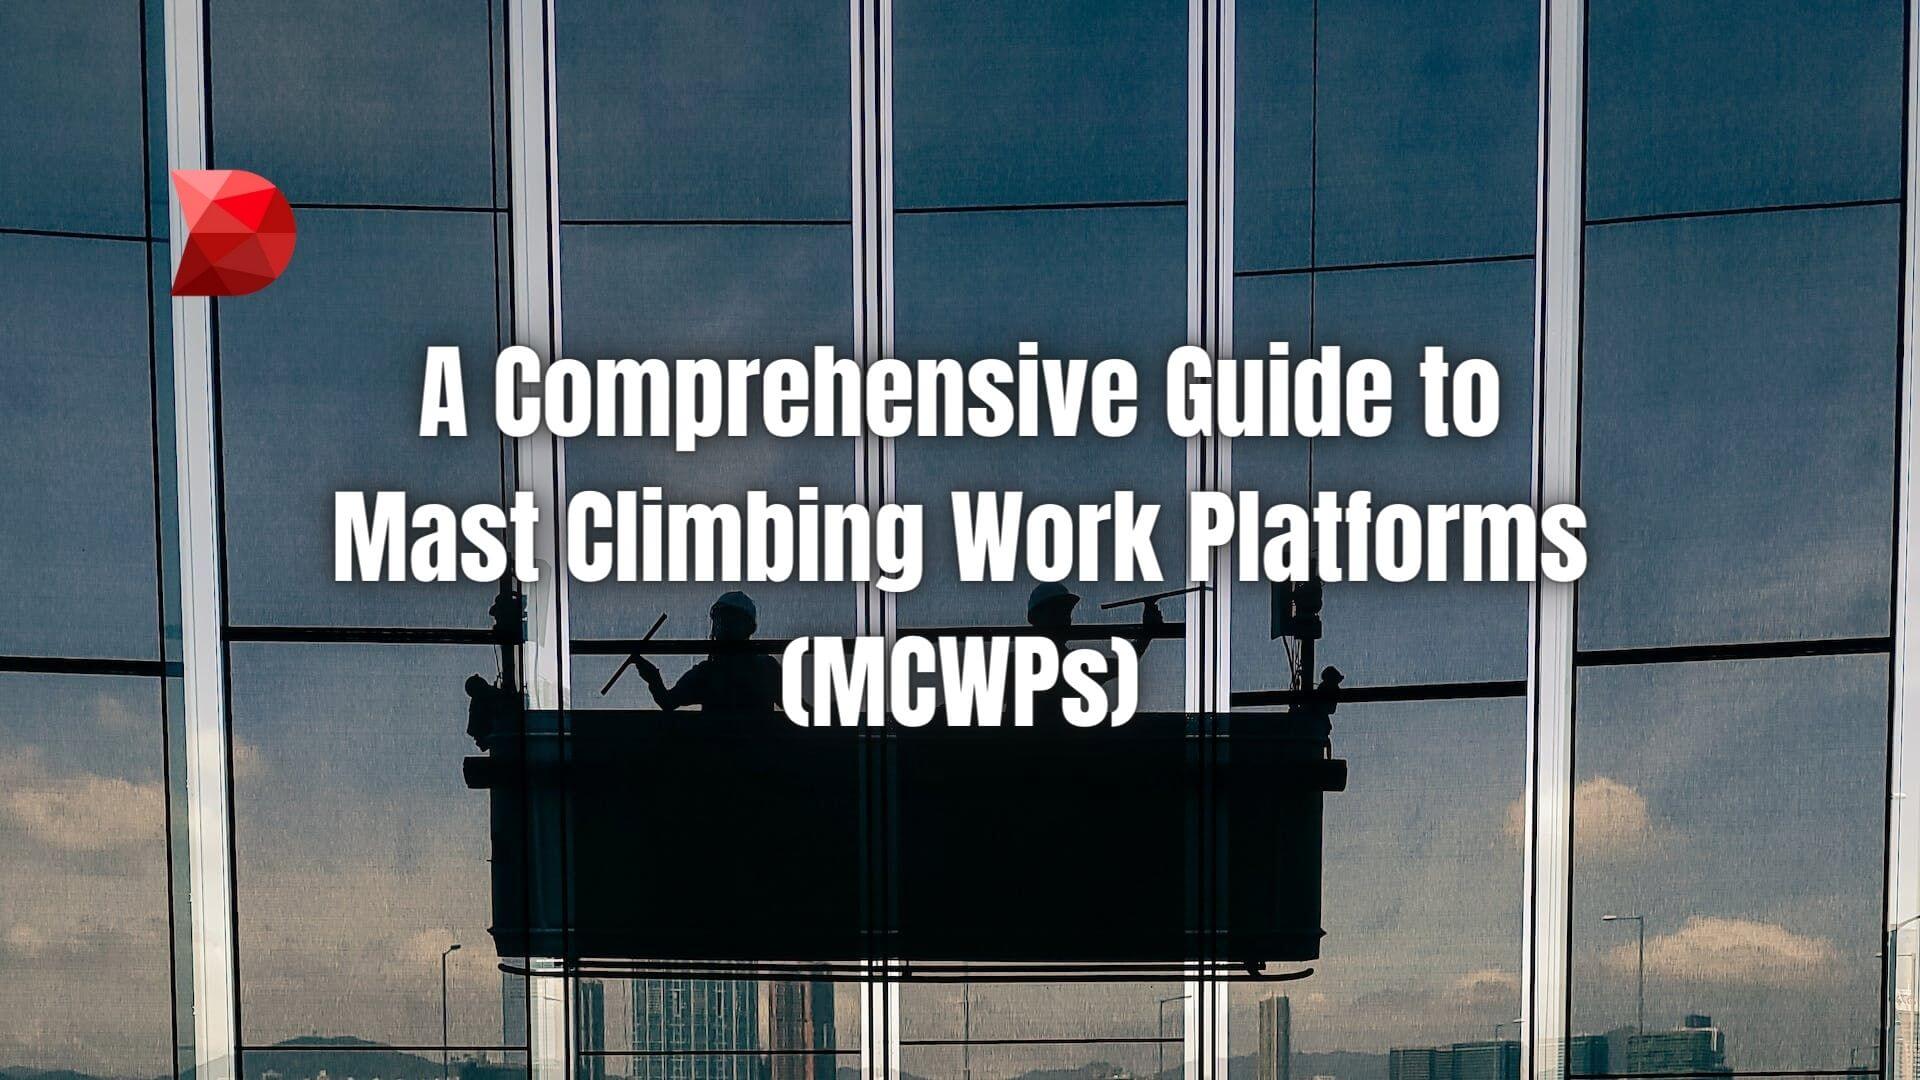 This article will provide a quick guide to MCWPs that includes what they are and how they work. Read here to learn more!